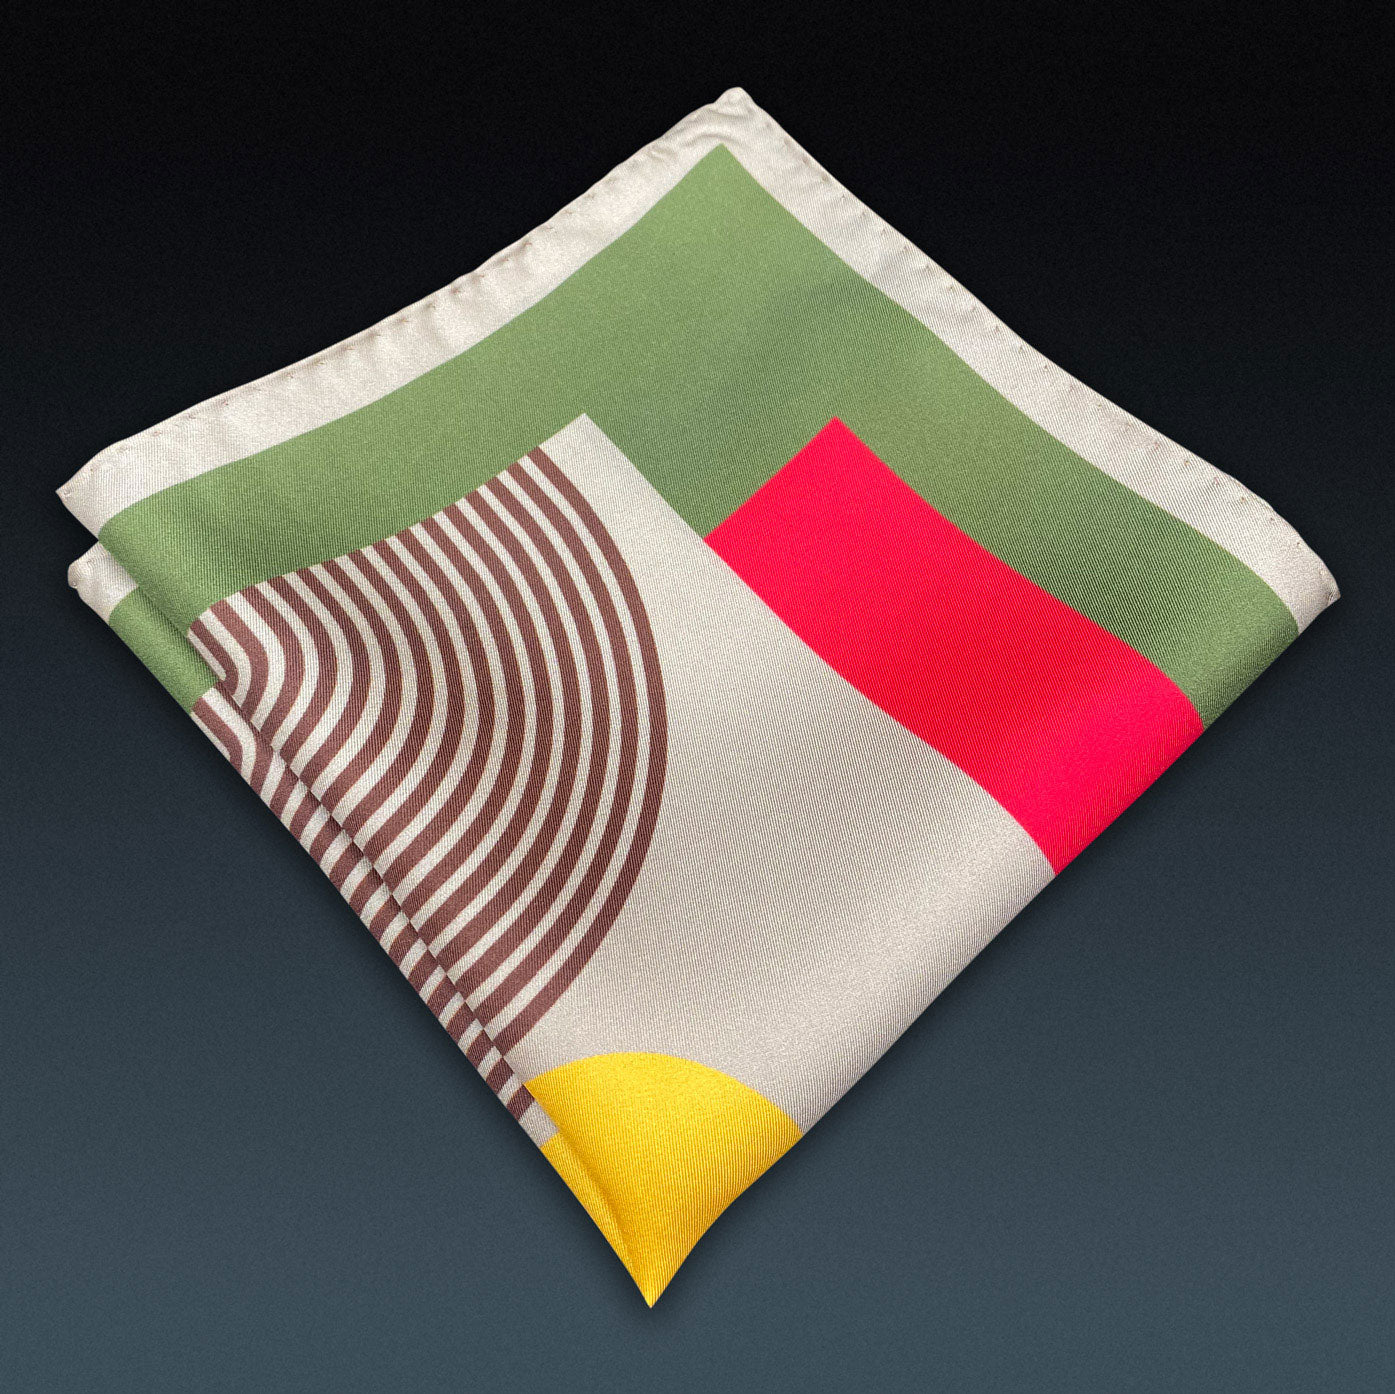 Folded 'Tay' silk pocket square from SOHO Scarves, showing the retro geometric pattern. Placed on a dark background.